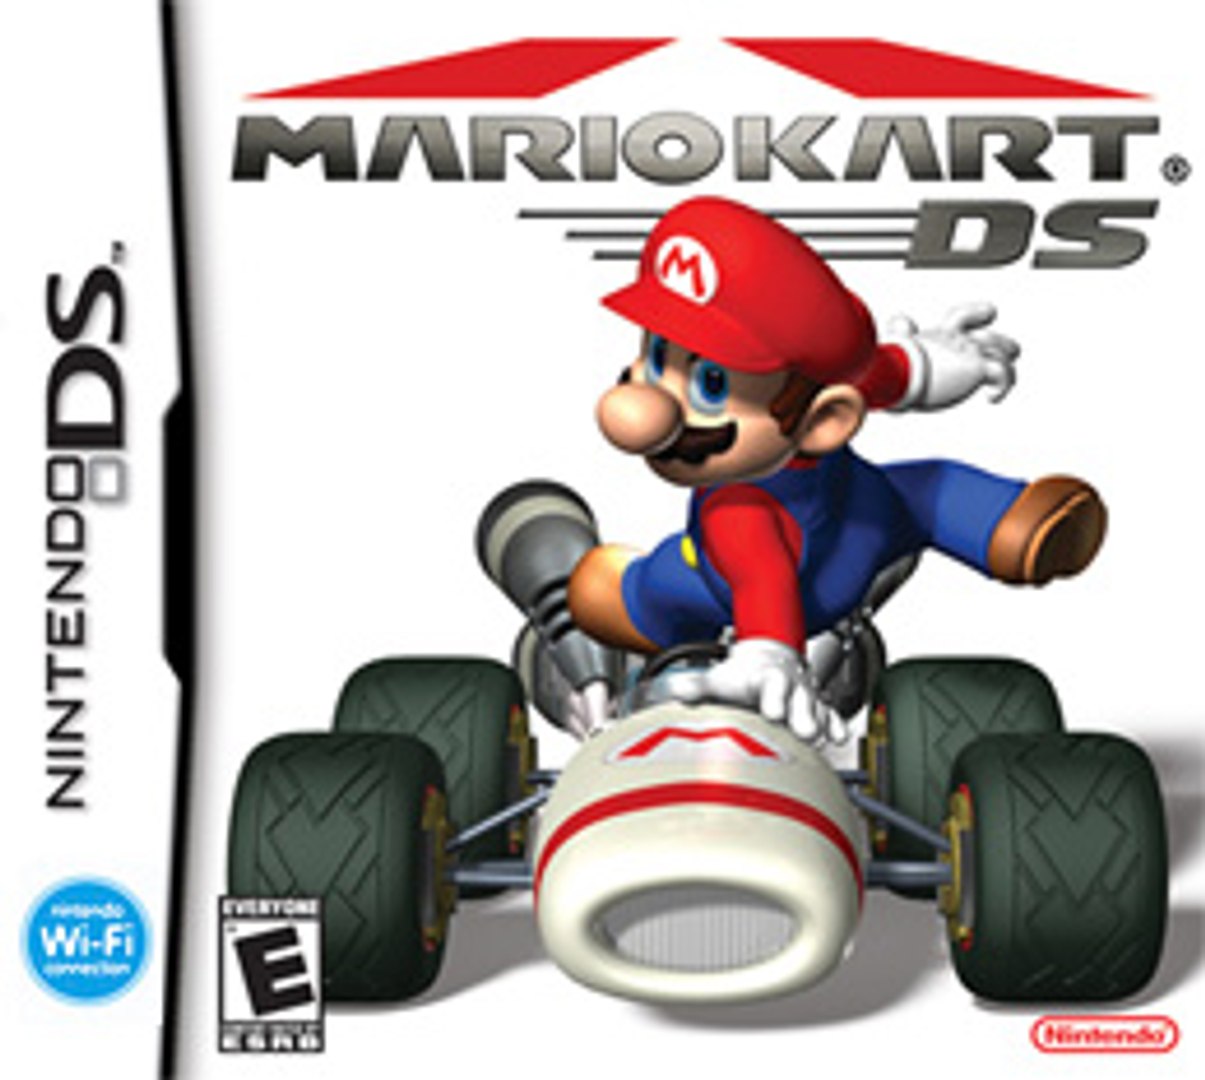 Mario Kart 64 Game Over Mario Kart DS Soundfonts Video - video Dailymotion